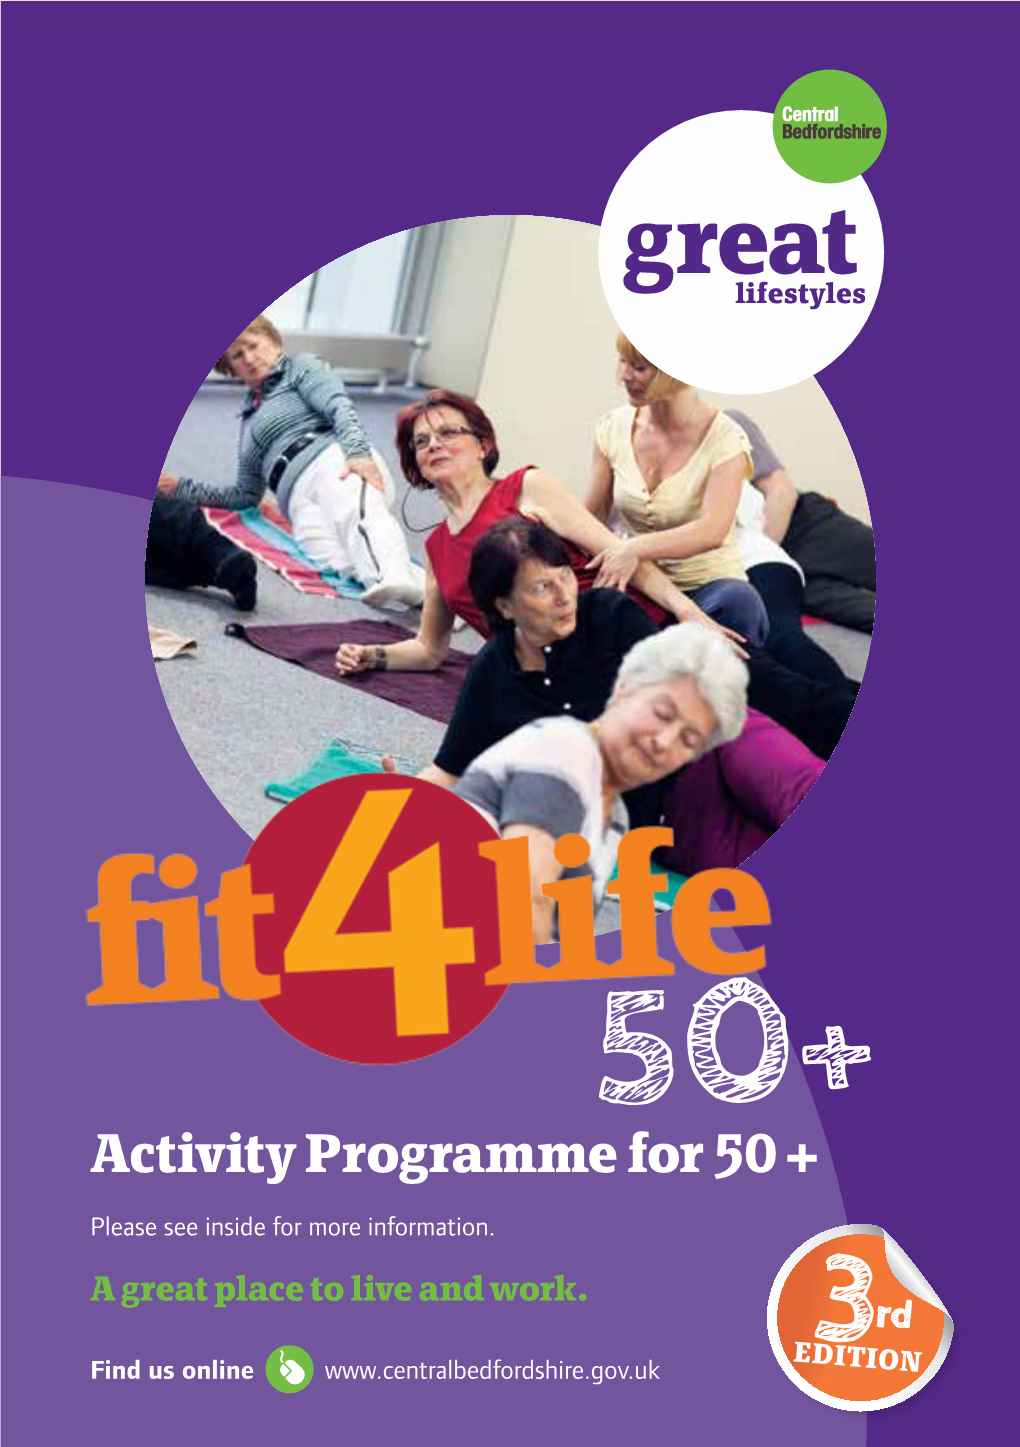 Activity Programme for 50 +